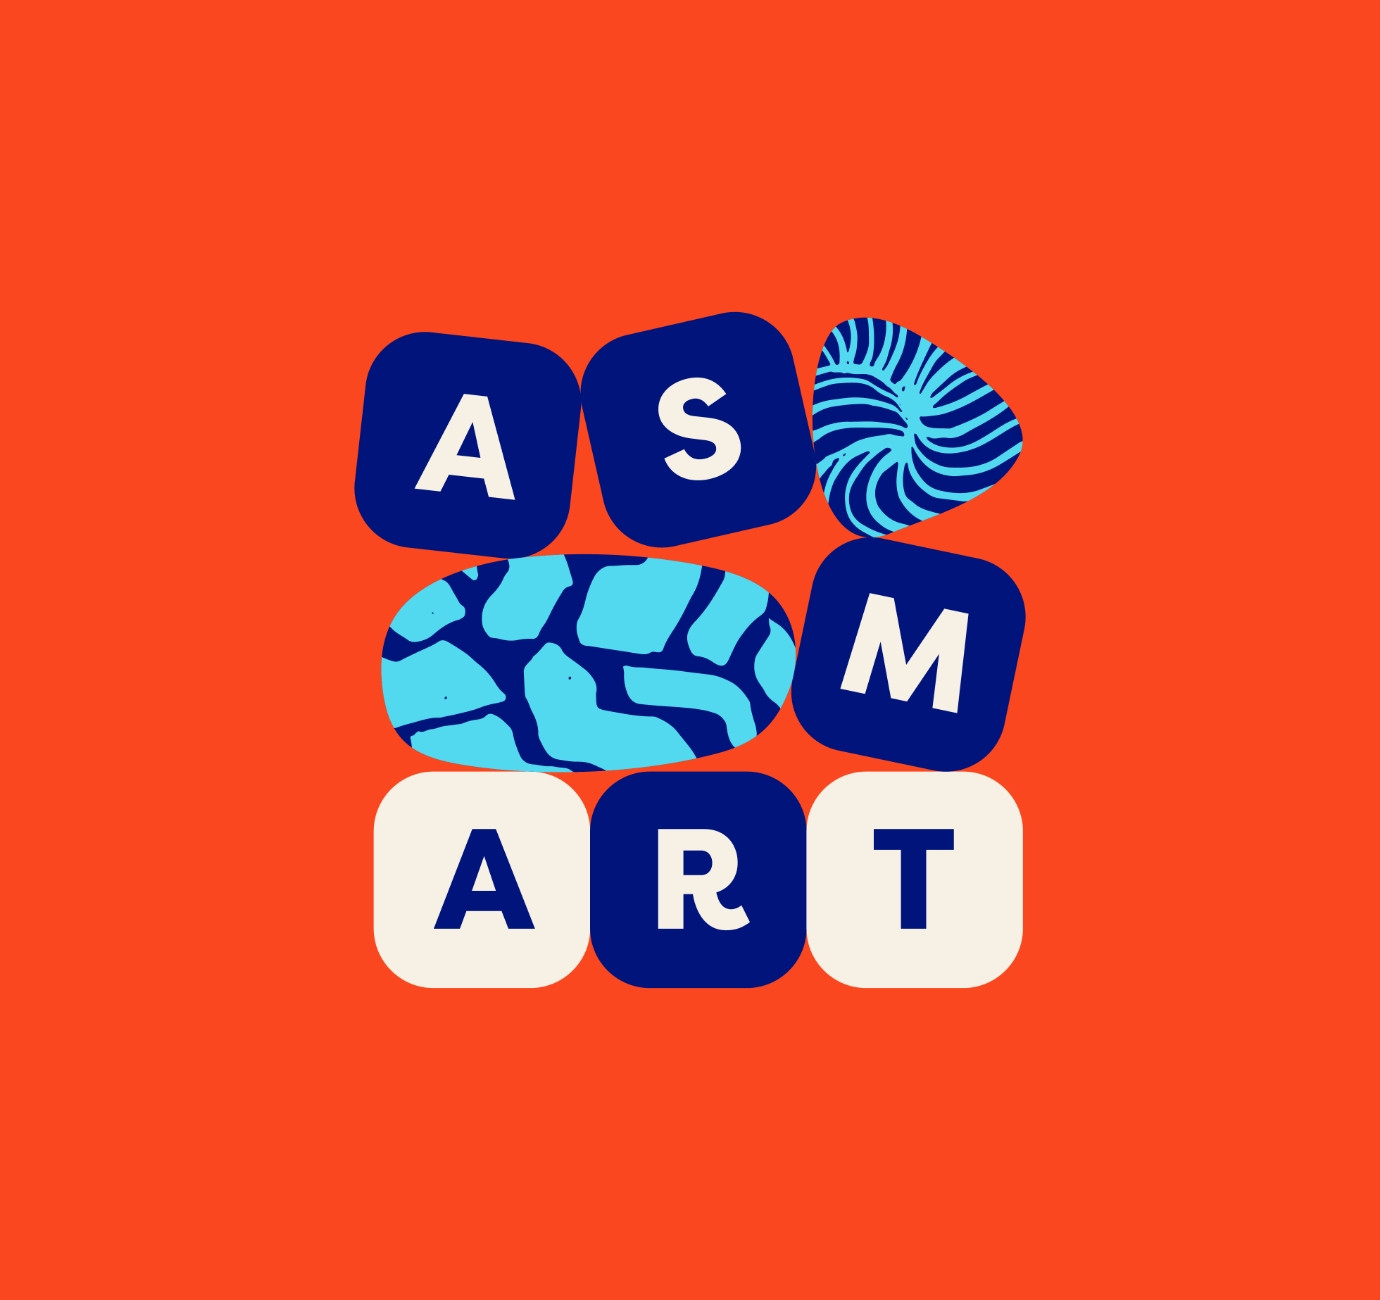 Concrete Youth charity ASMART logo design by Root Studio